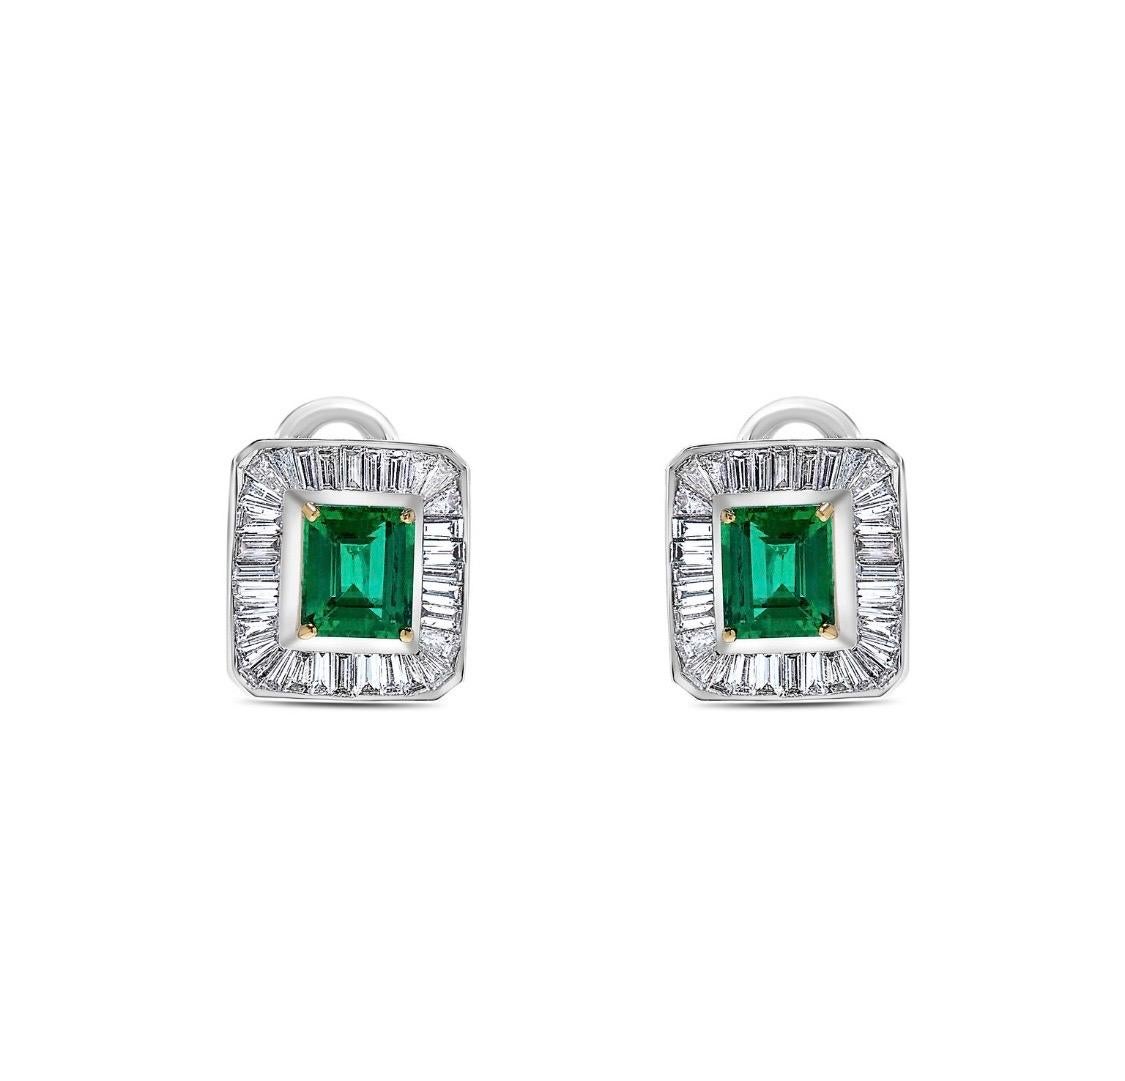 From the Emilio Jewelry Vault, Showcasing two gem quality certified Colombian emeralds in the center of vivid color, excellent transparency and clarity.  
Emeralds: 3.50 carats
diamonds: 1.80 carats colorless vvs1 clarity. 
Please inquire for more